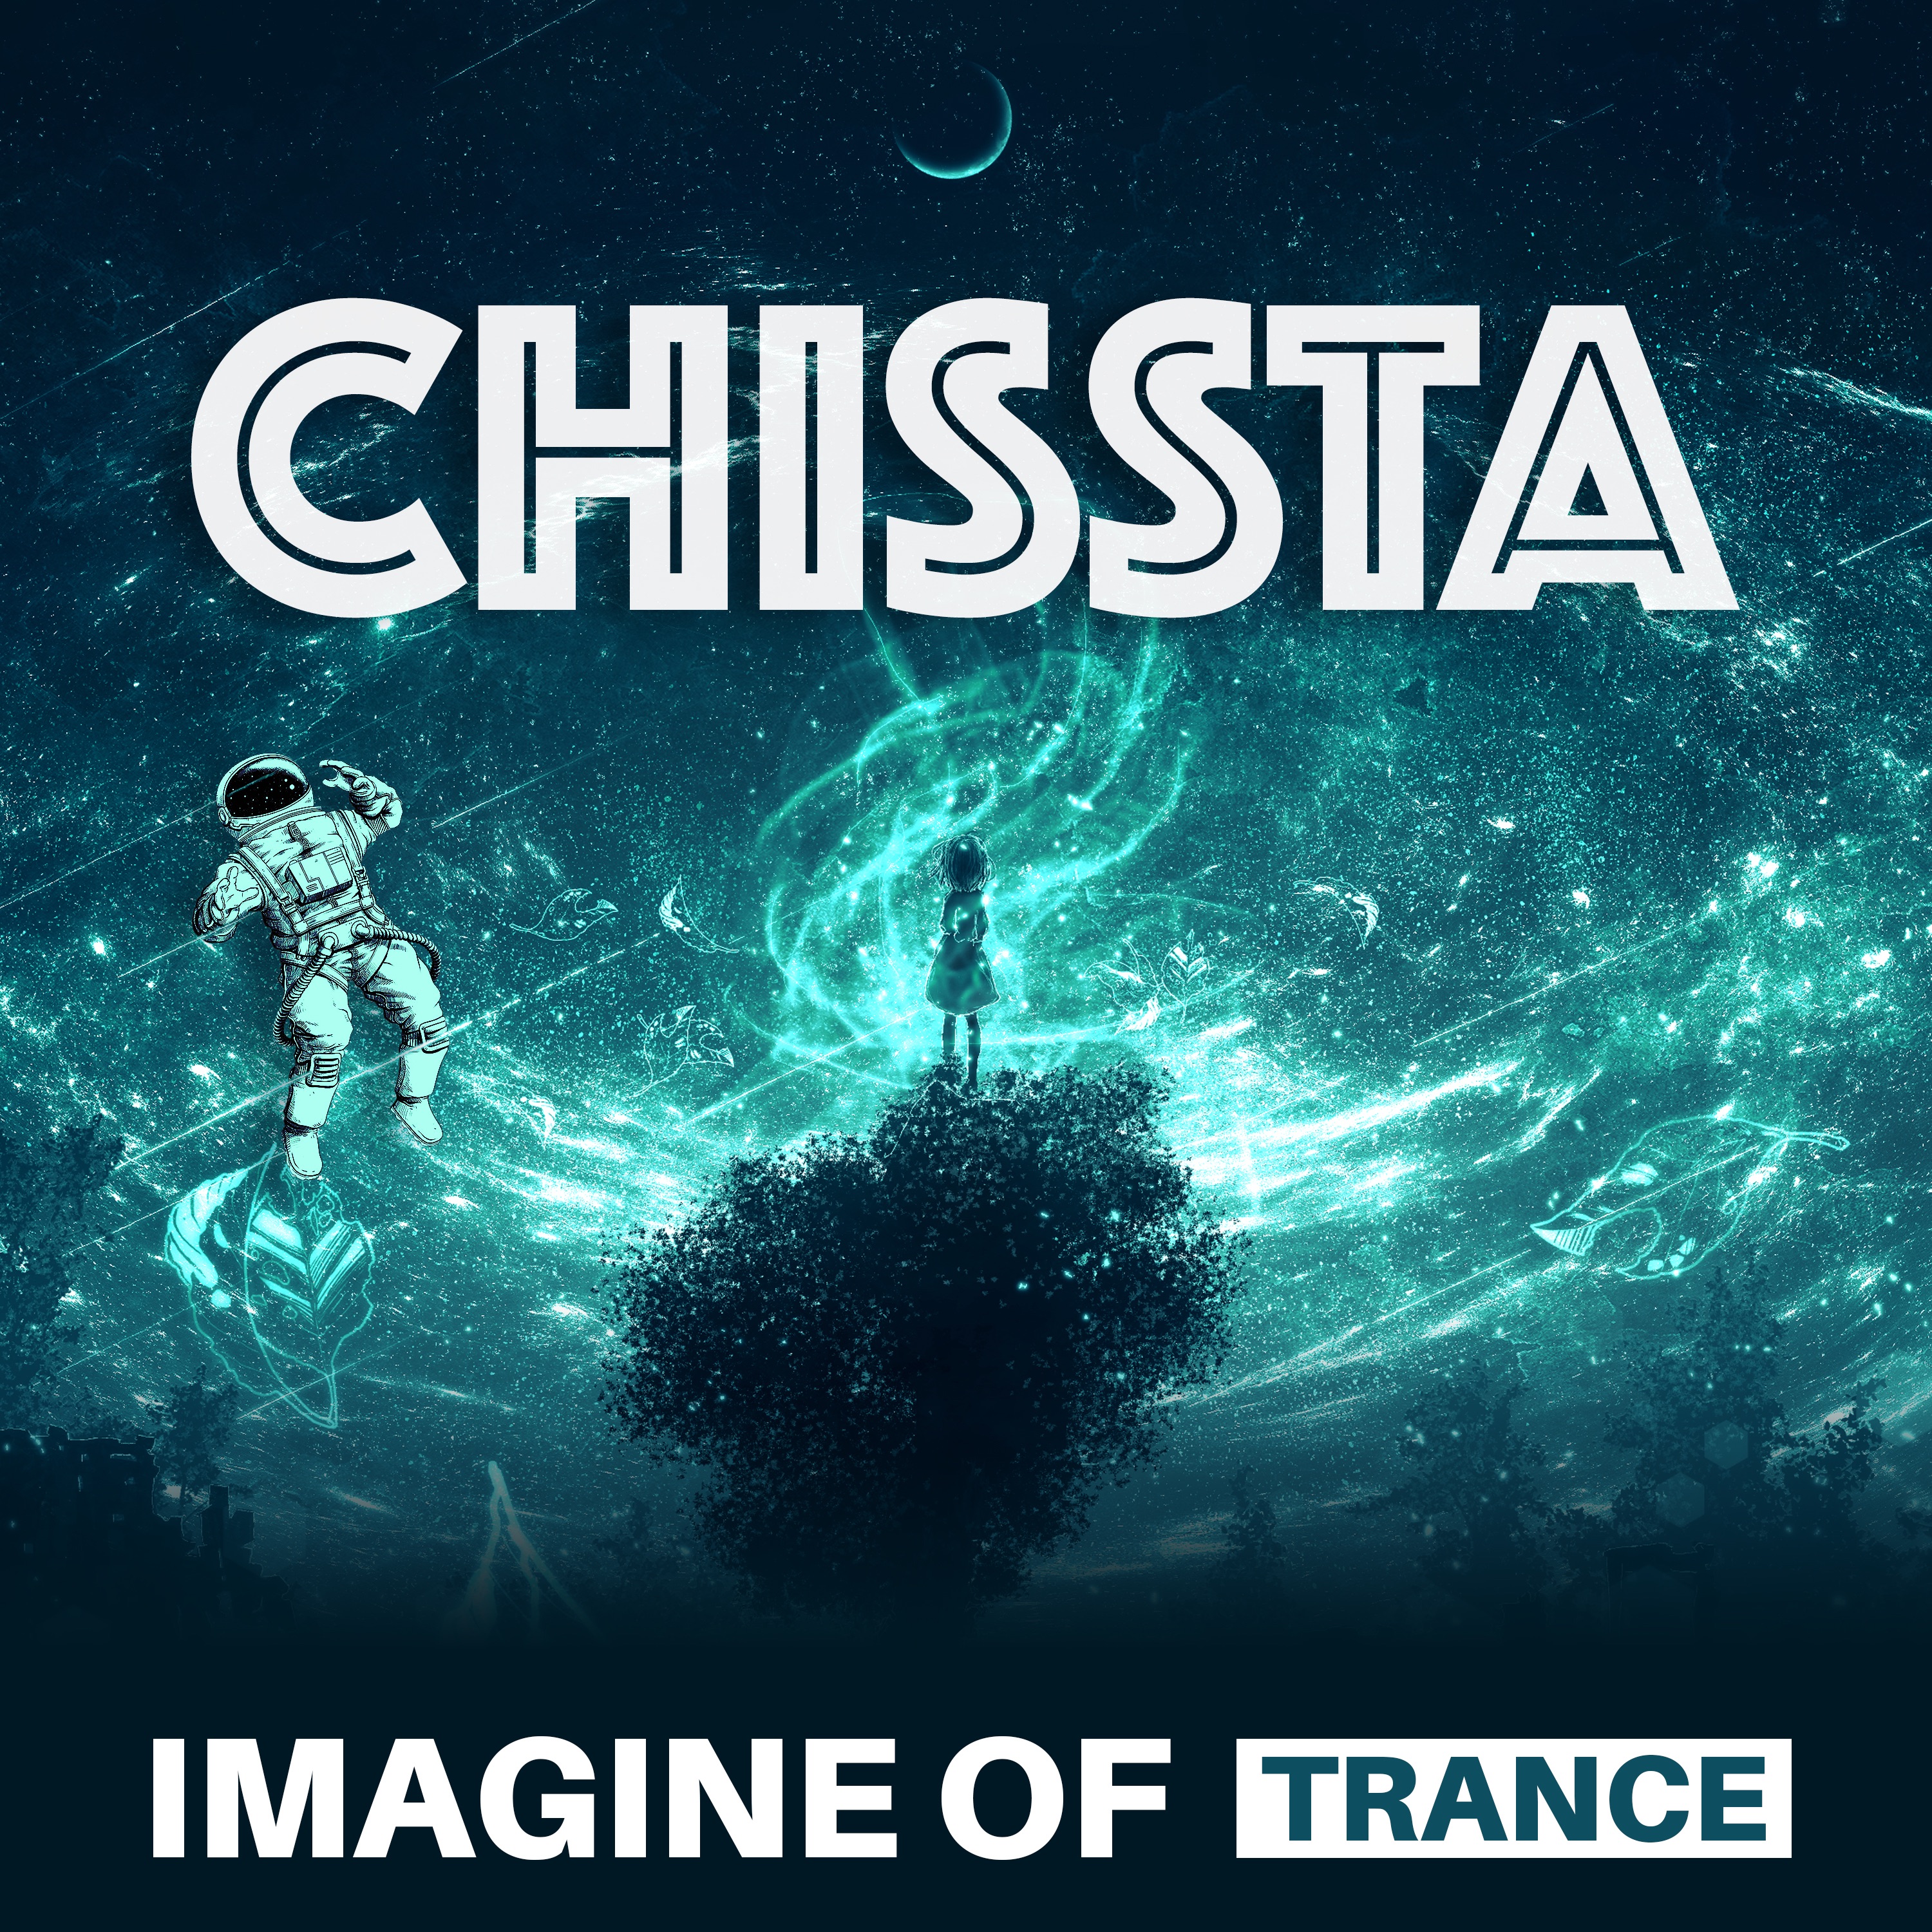 Imagine of Trance by Chissta